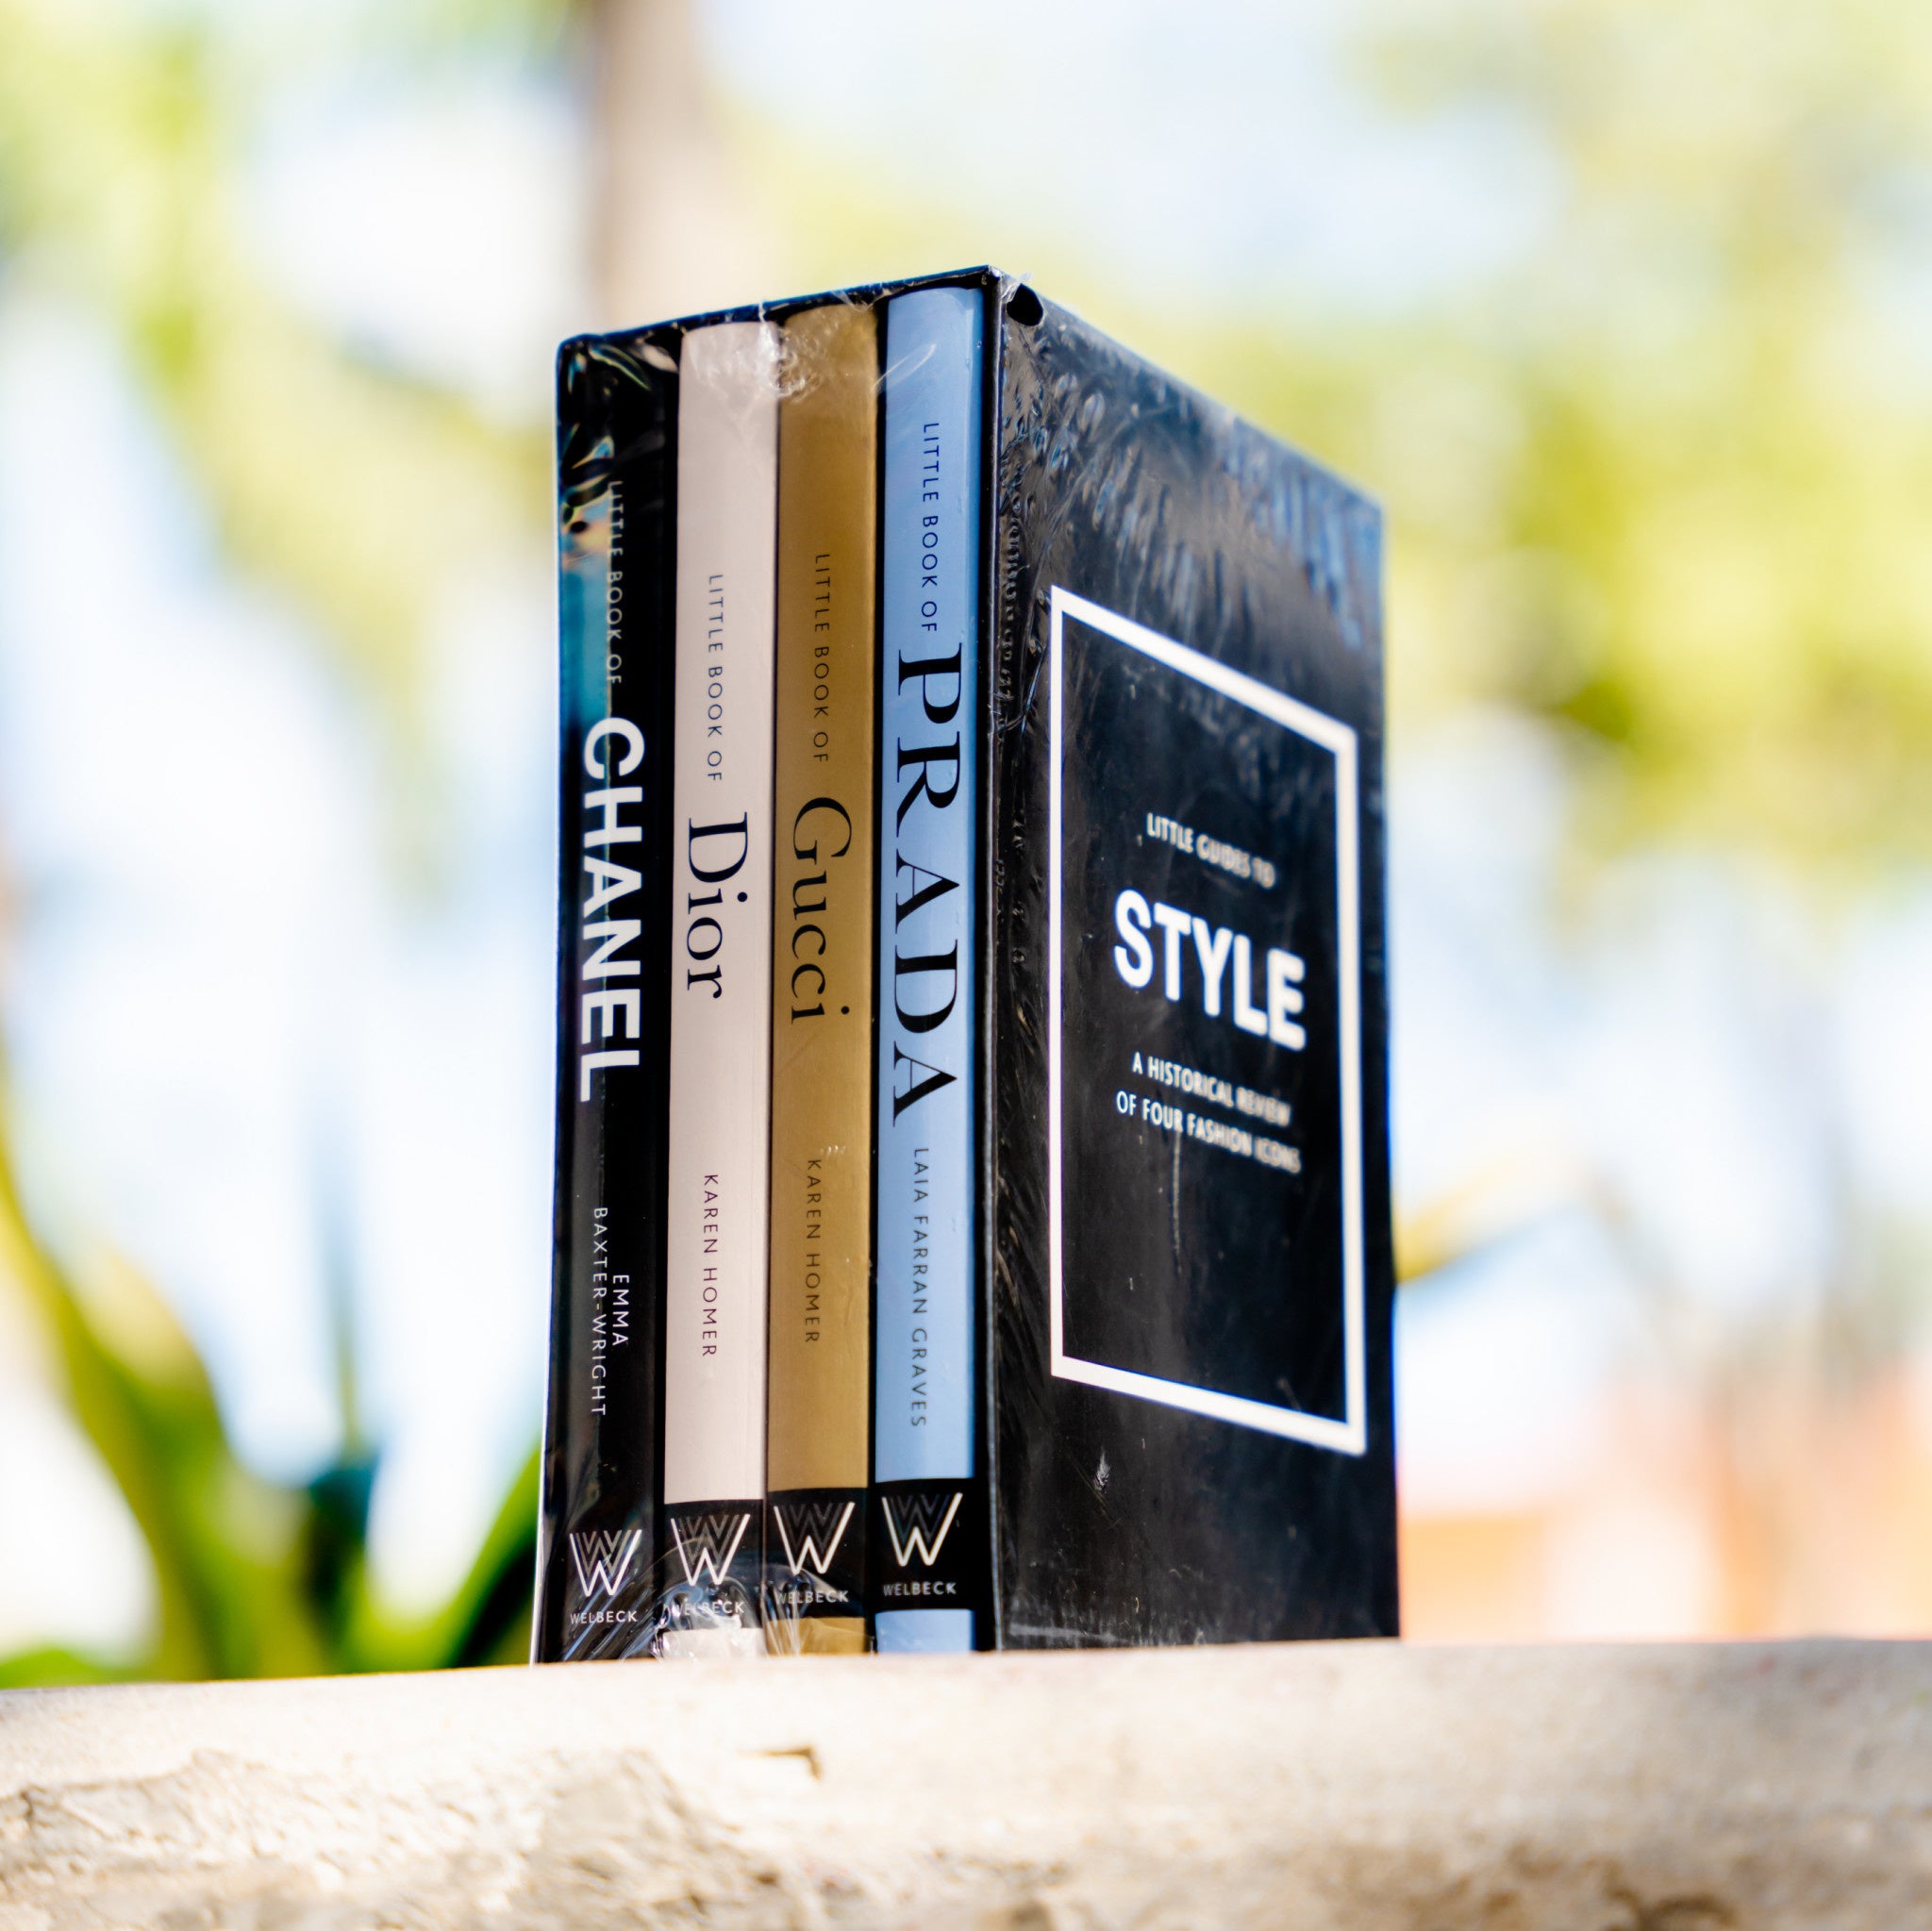 Little Guides to Style: The Story of Four Iconic Fashion Houses [Book]